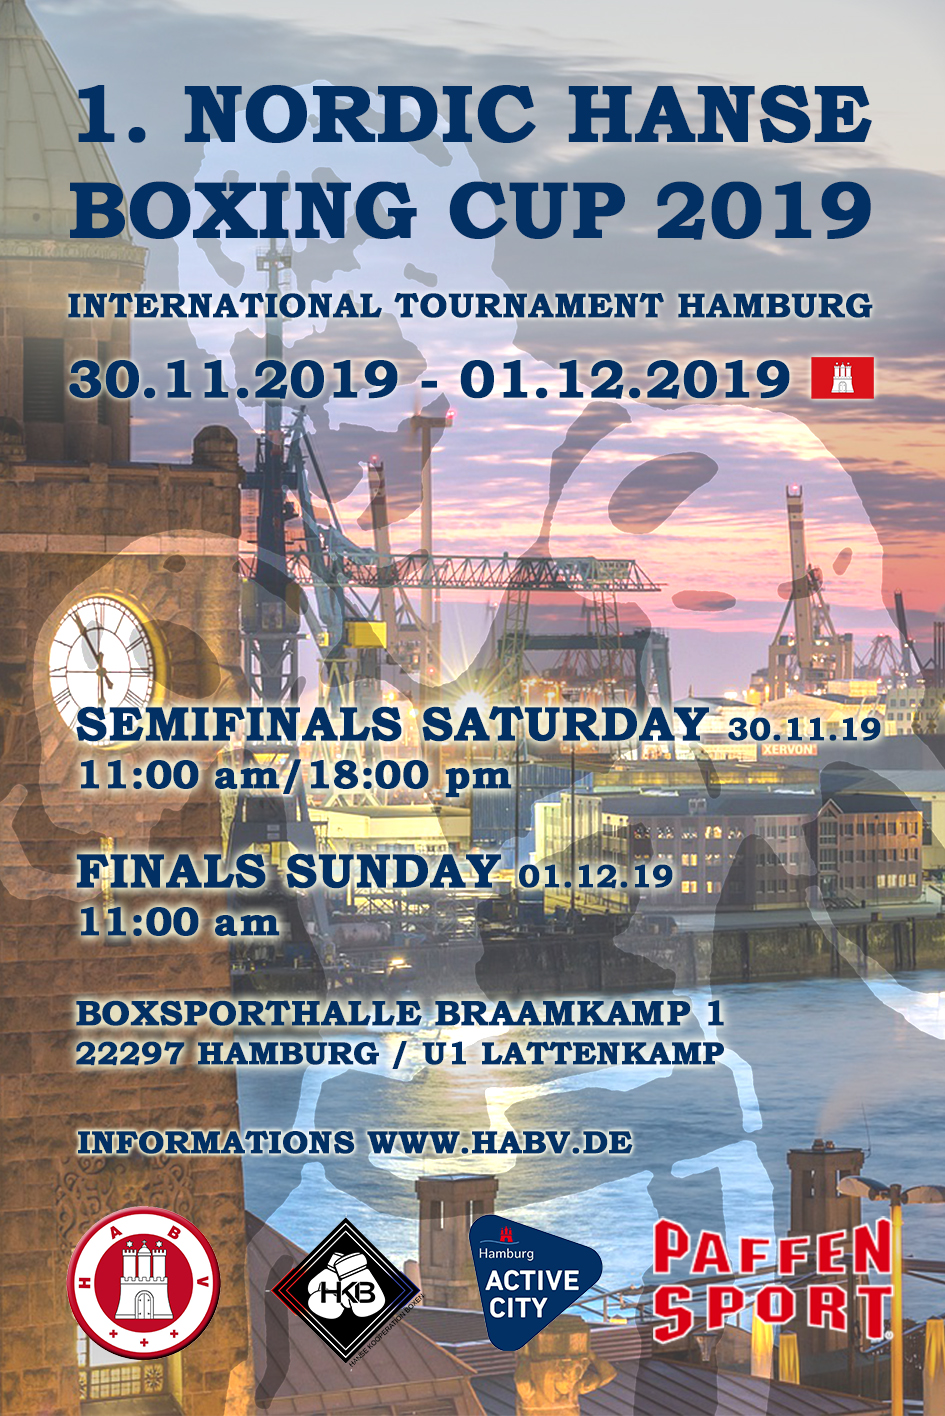 1. Nordic Hanse Boxing Cup 2019